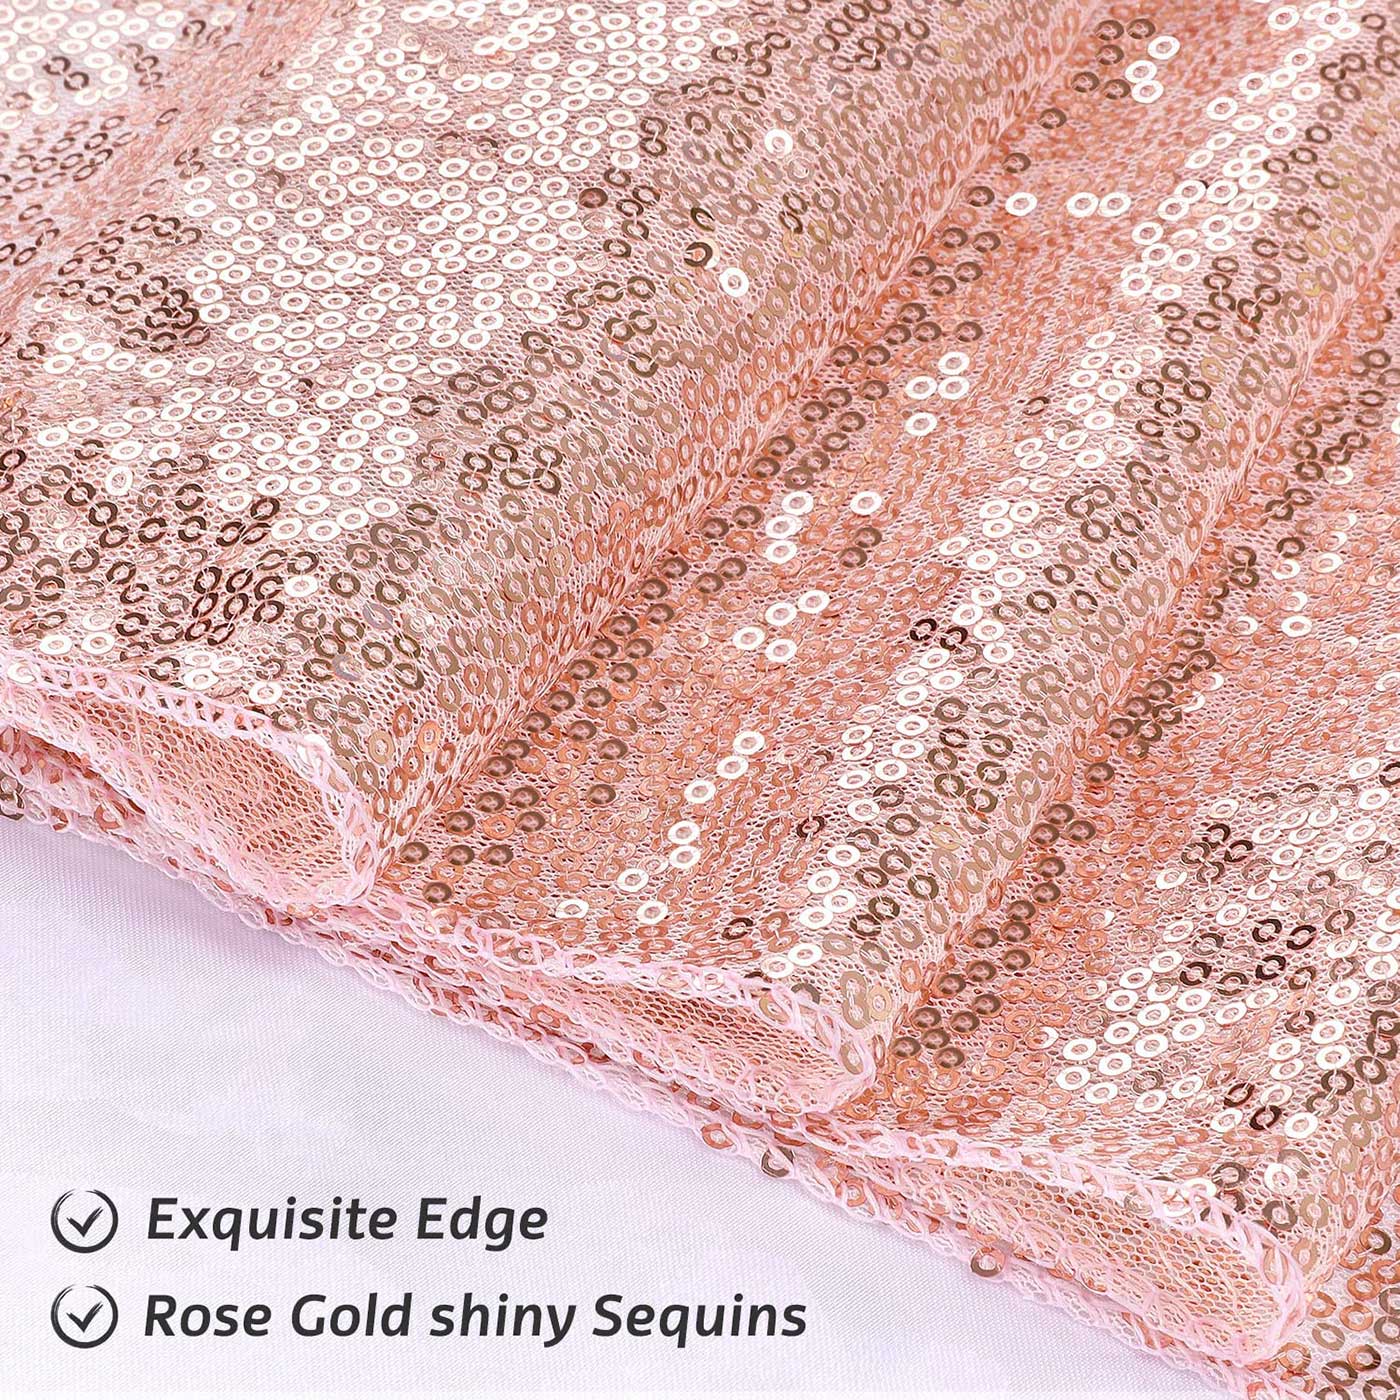 Sparkling Rose Gold Sequin Table Runner for Party Decorations - 12 x 108 inch Glitter Runner for Rectangle Tables